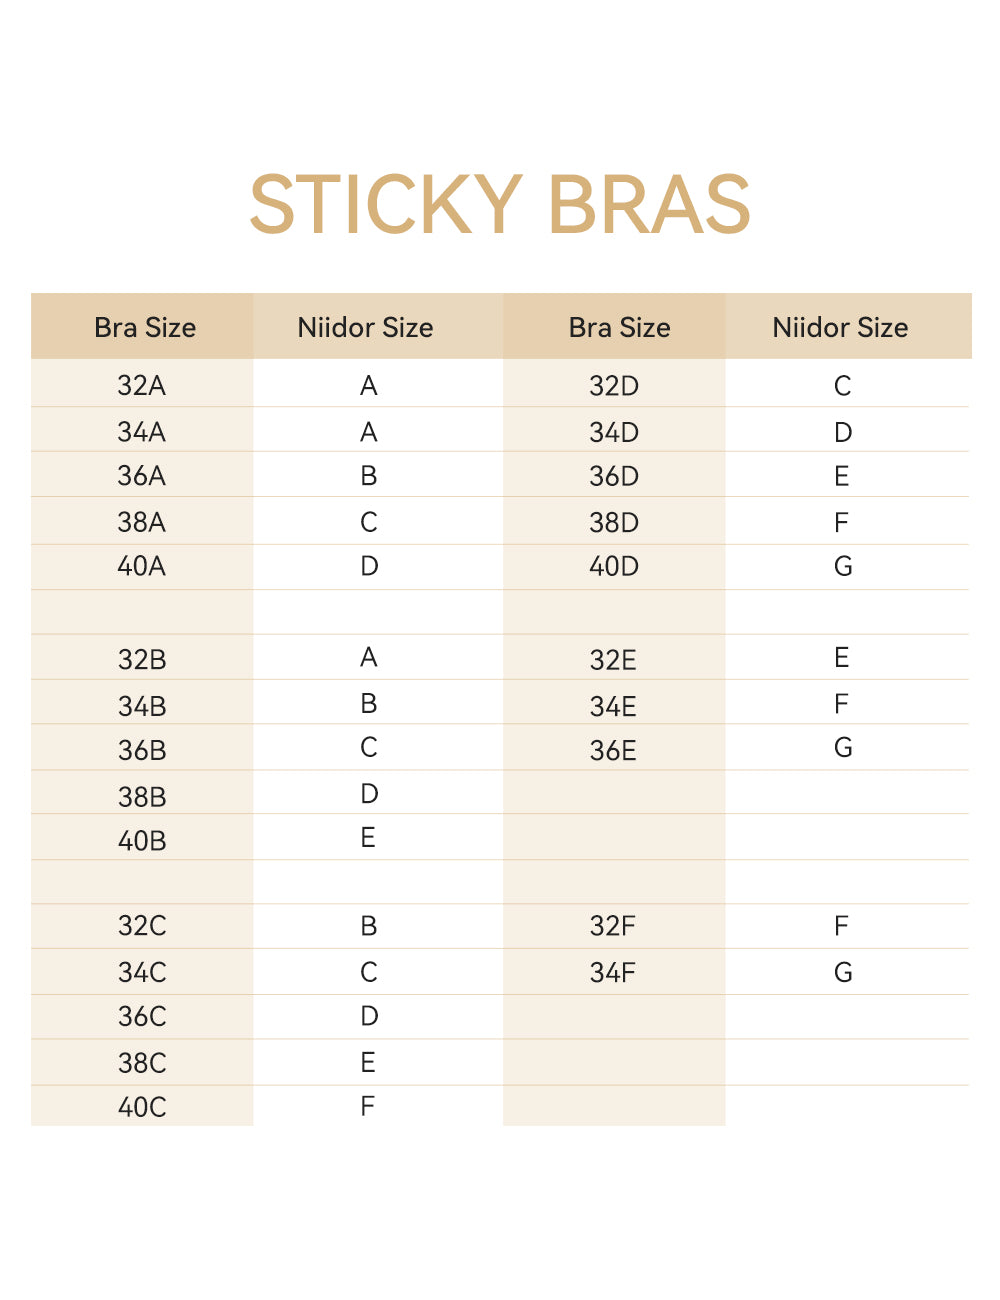 Bra Fitting Guide: Find Your Perfect Bra Size